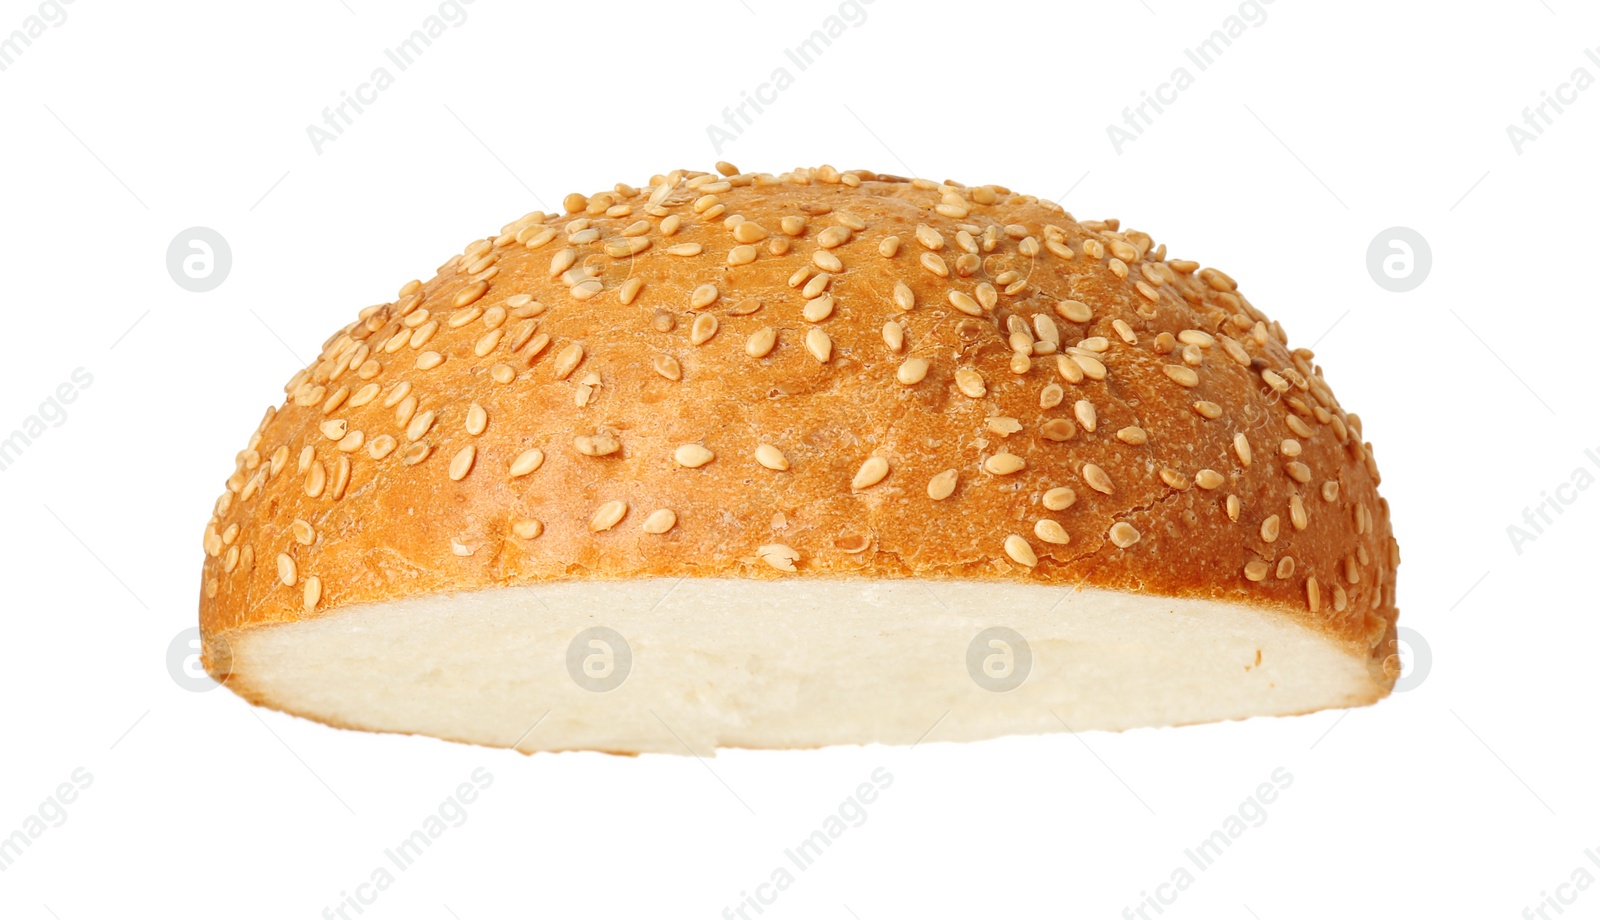 Photo of Half of fresh burger bun with sesame seeds isolated on white